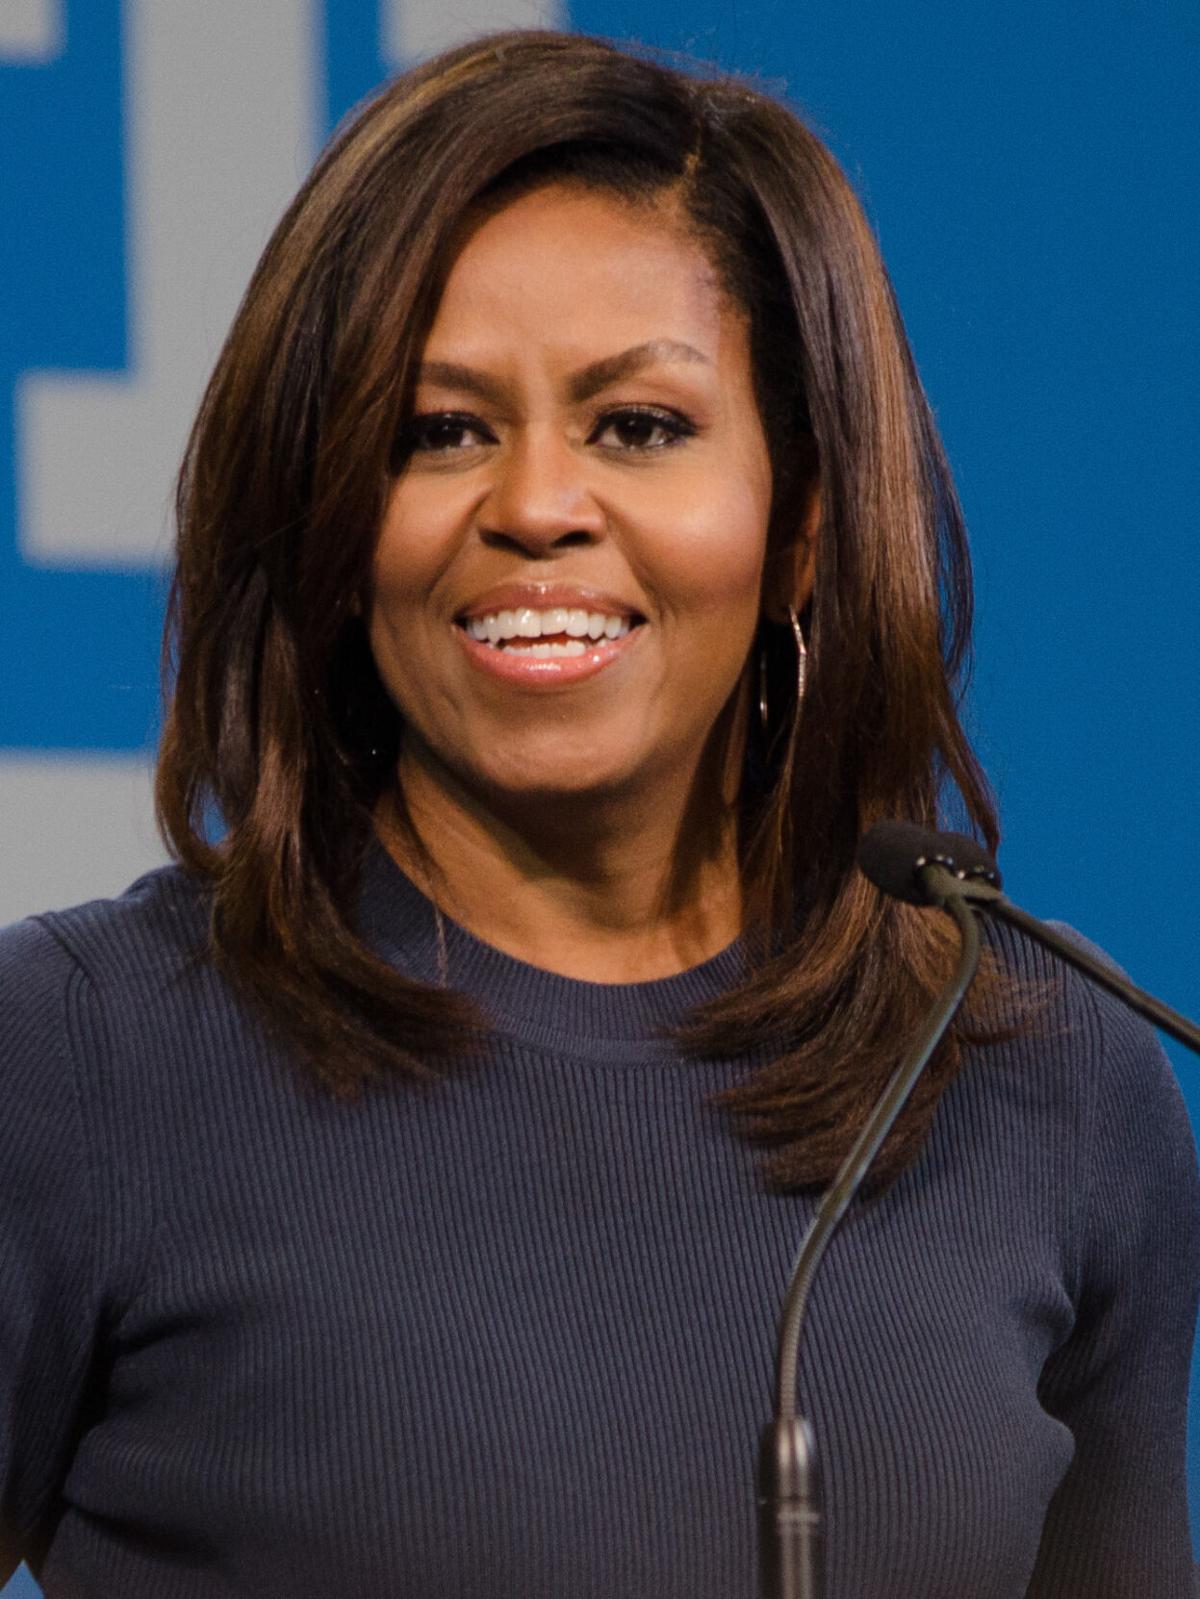 Clayton schools names new facility after Michelle Obama | News | news ...